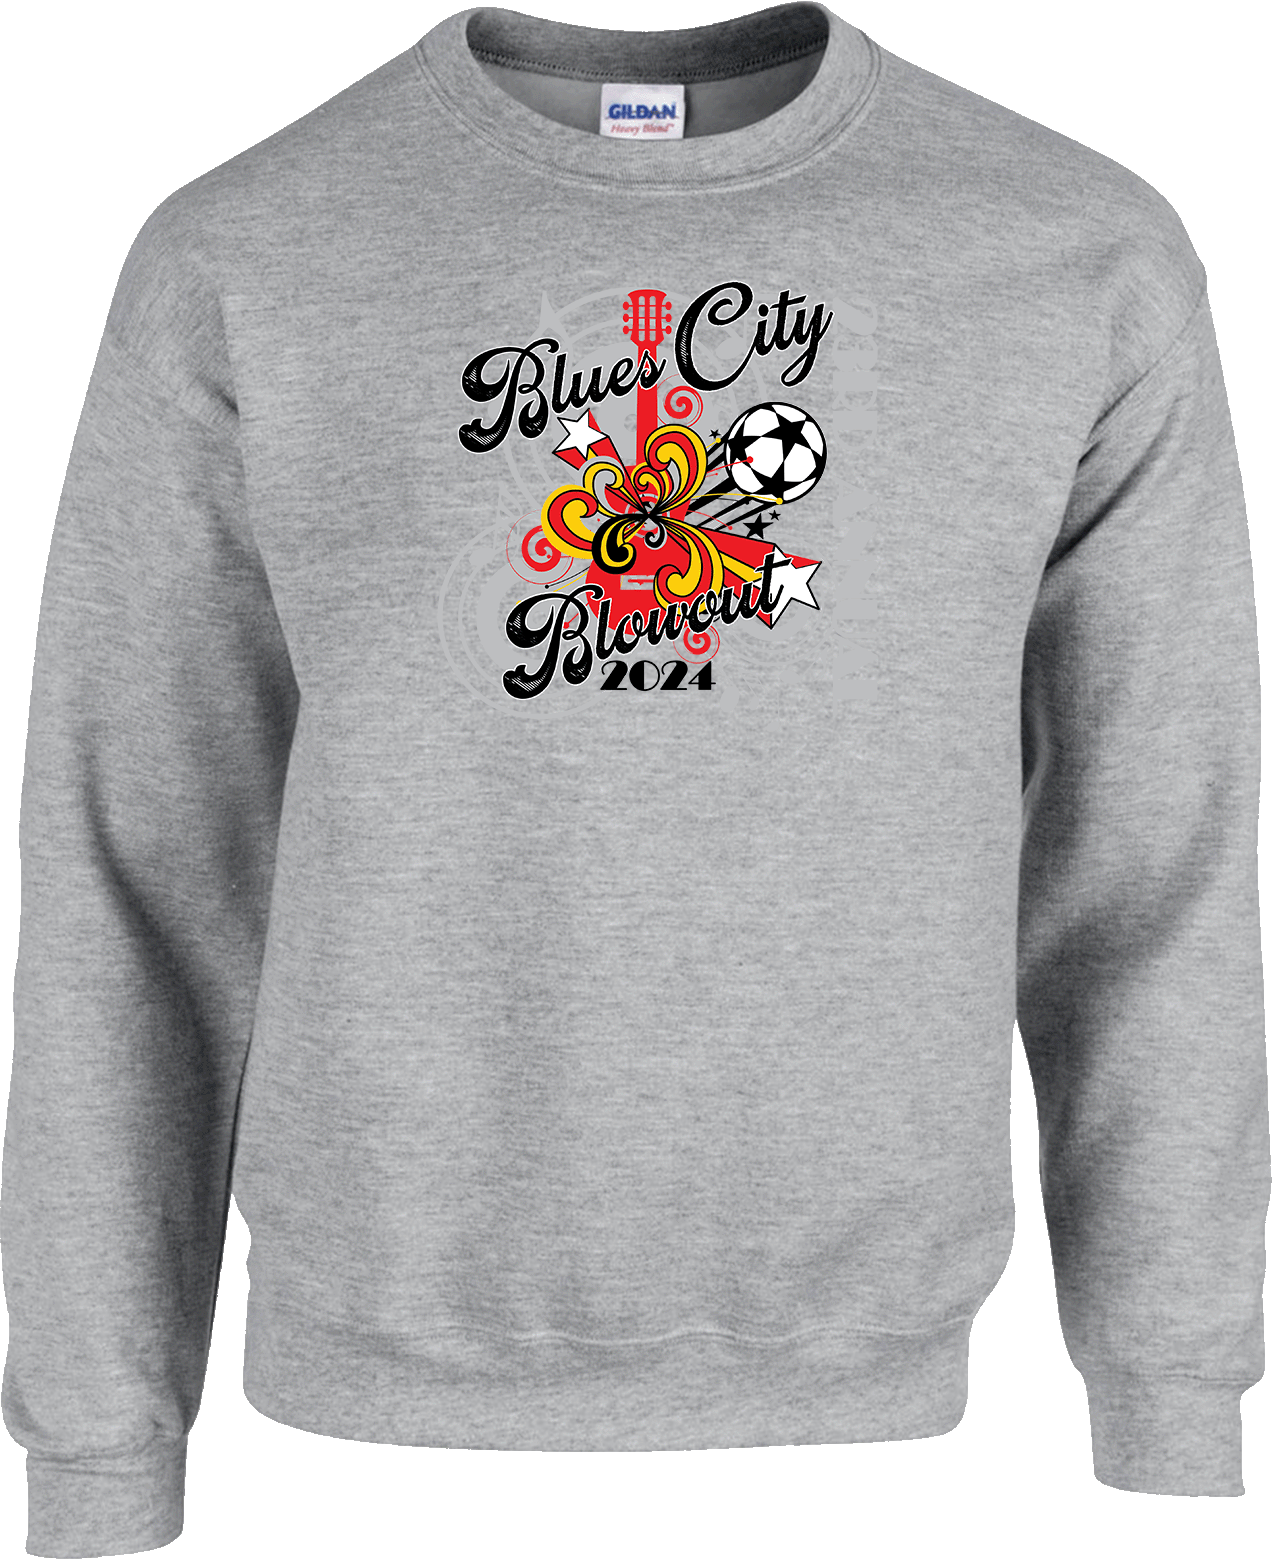 Crew Sweatershirt - 2024 23rd Annual Blues City Blowout